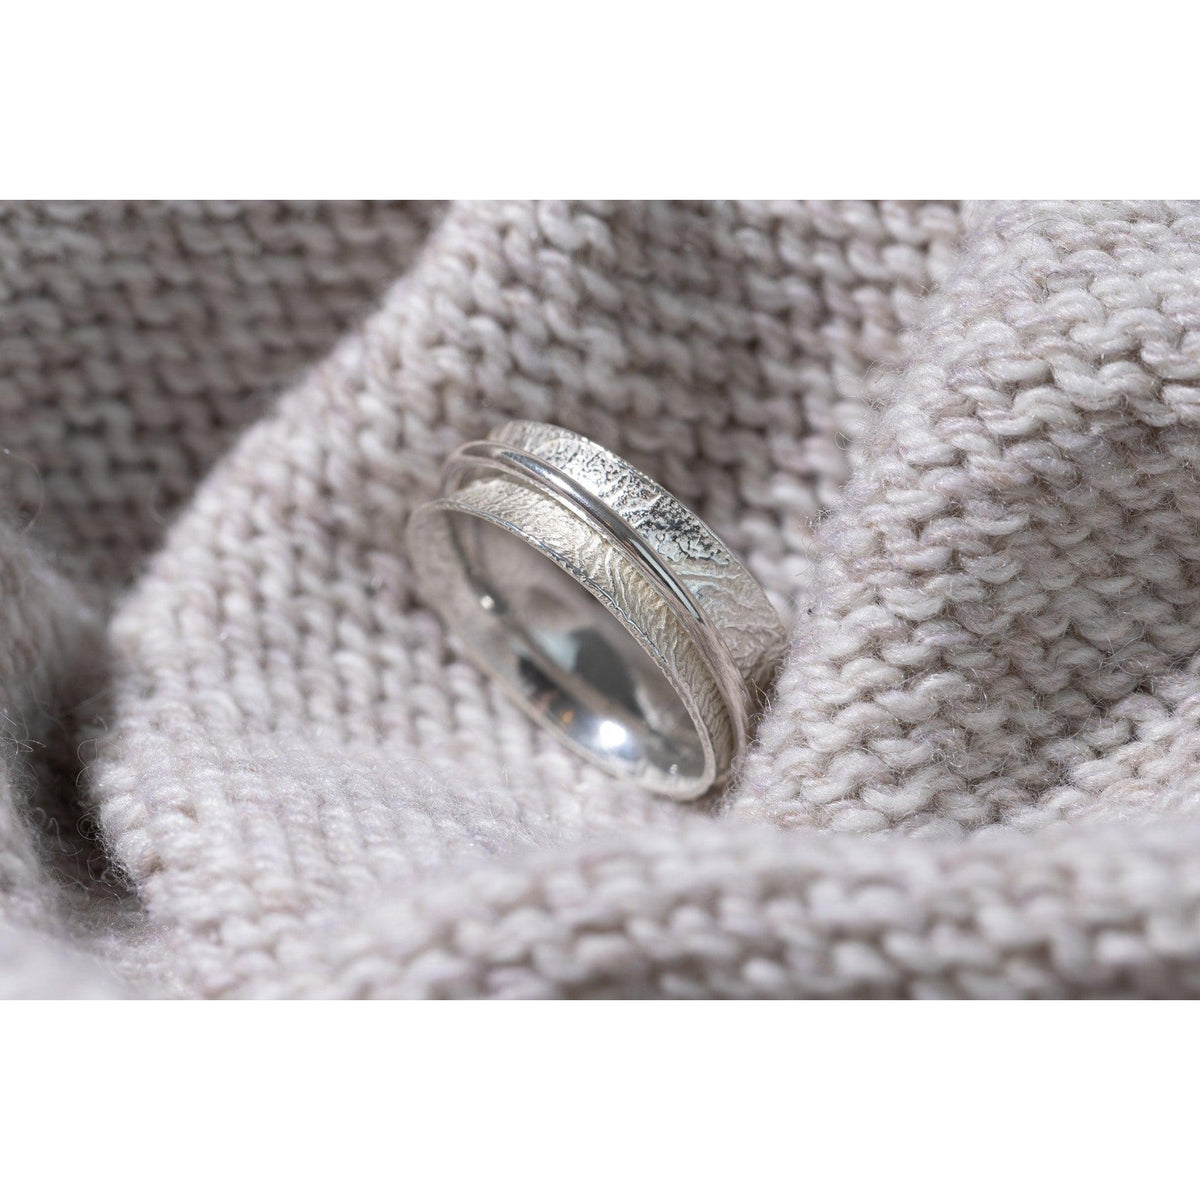 &#39;LG51 - Silver &#39;Worry&#39; Ring&#39; by Les Grimshaw, available at Padstow Gallery, Cornwall